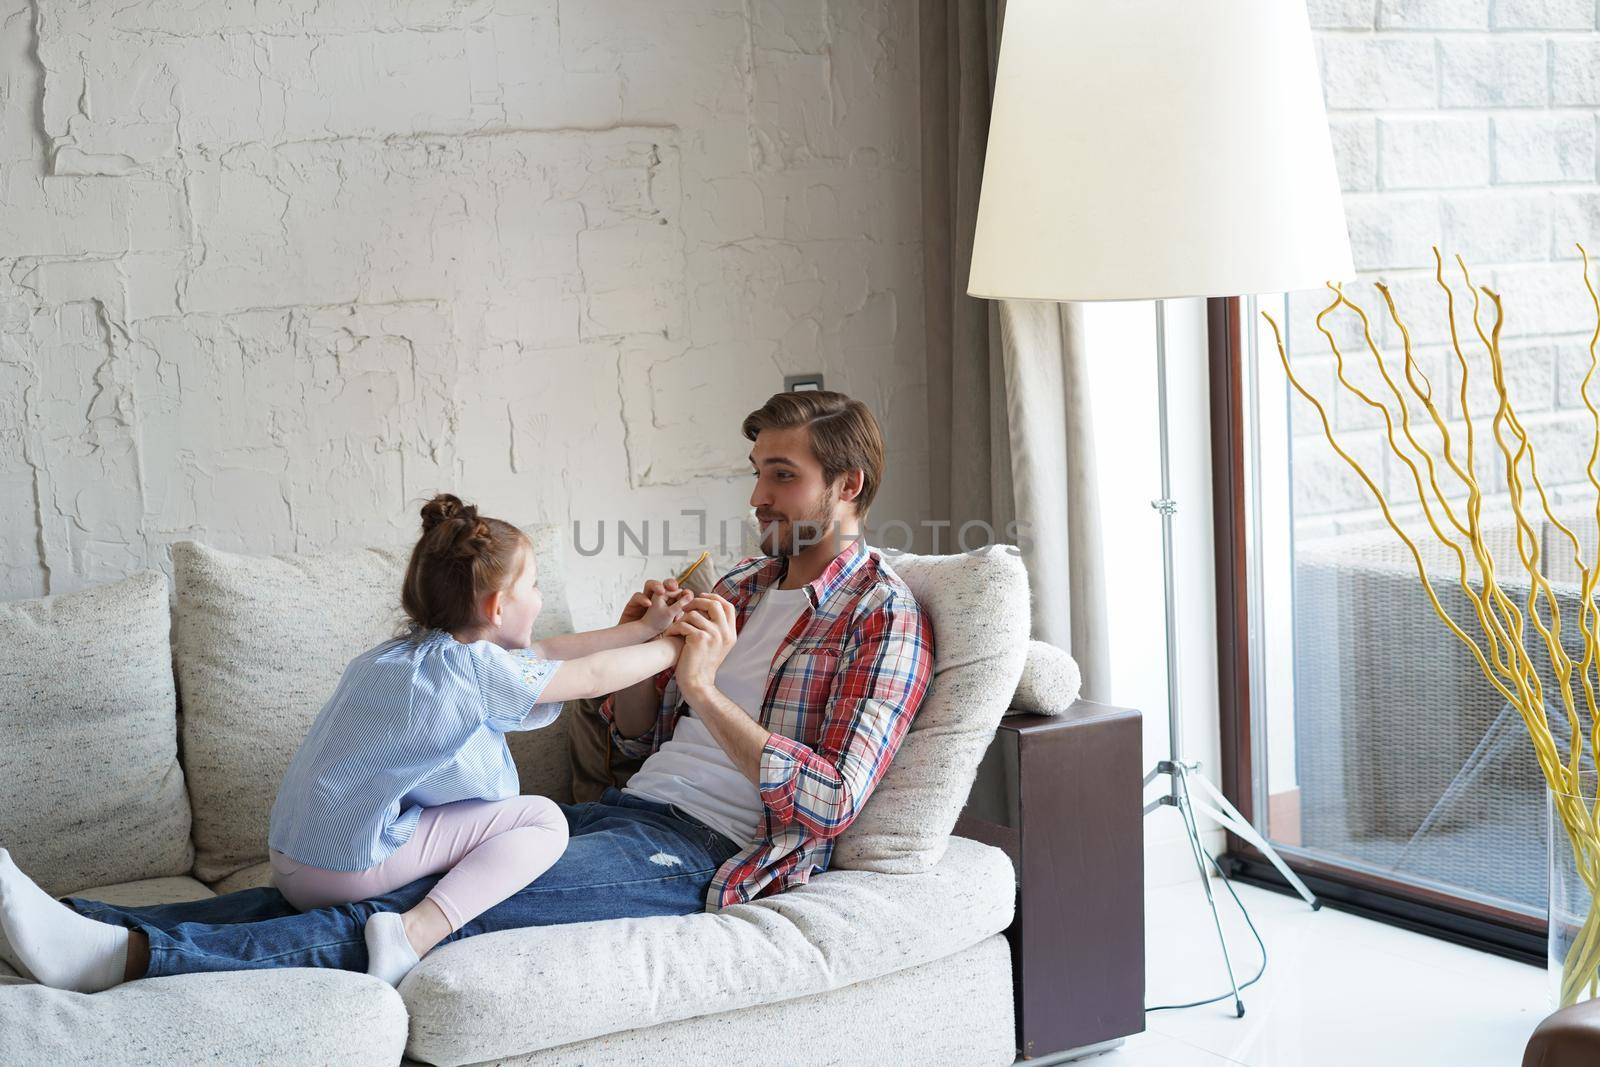 Cute little kid daughter laughing tickling playing with dad on sofa, happy father relaxing having fun with funny small child girl bonding enjoying leisure together in living room